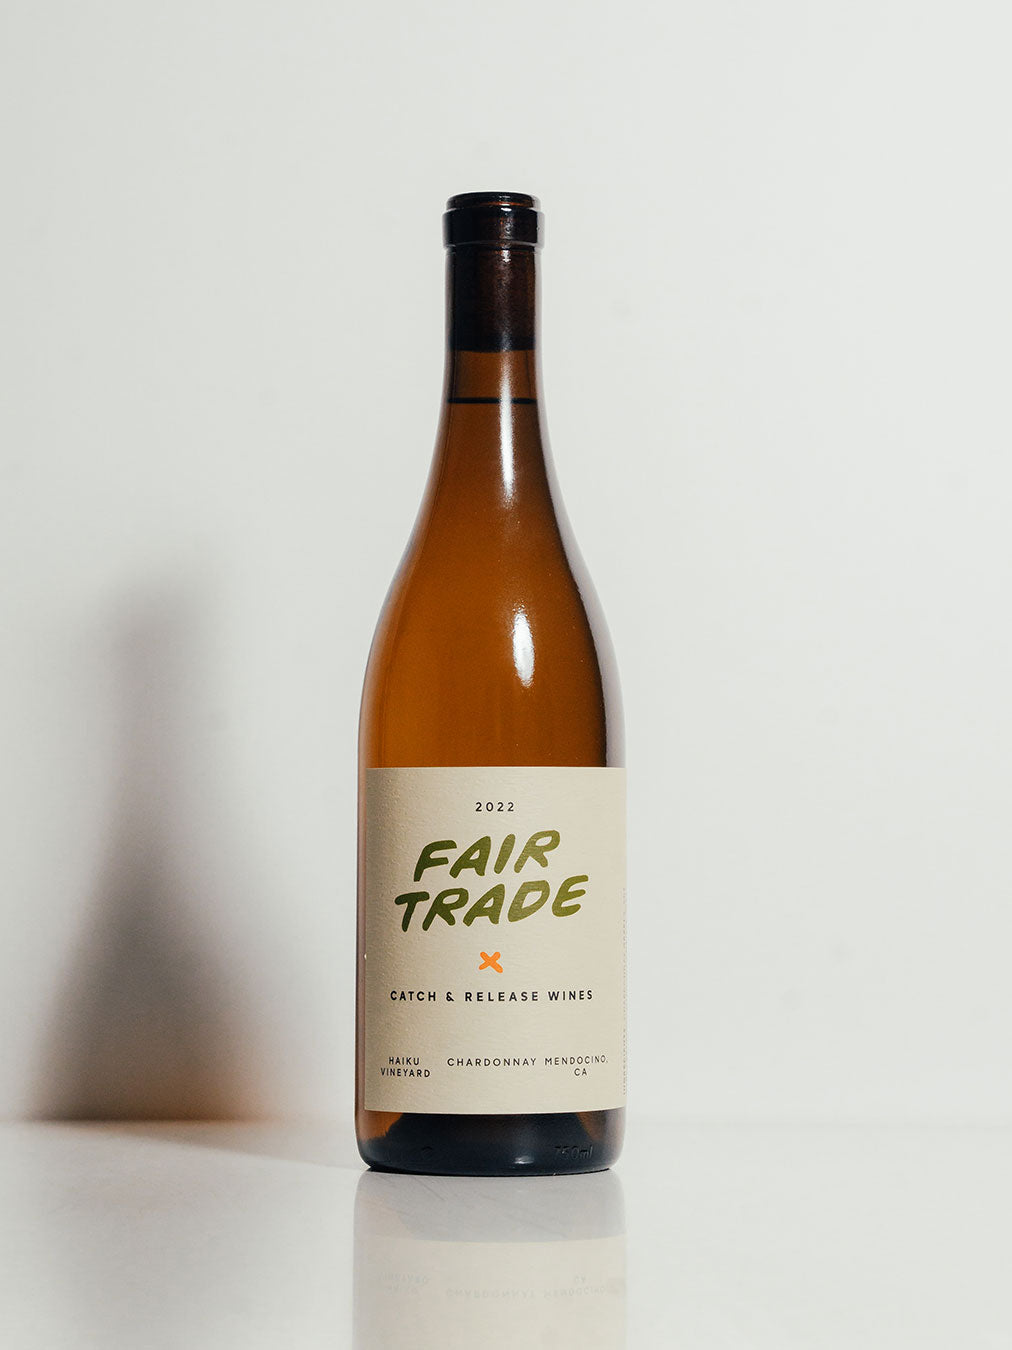 Catch & Release Wines 2022 Fair Trade Chardonnay made from organic fruit.